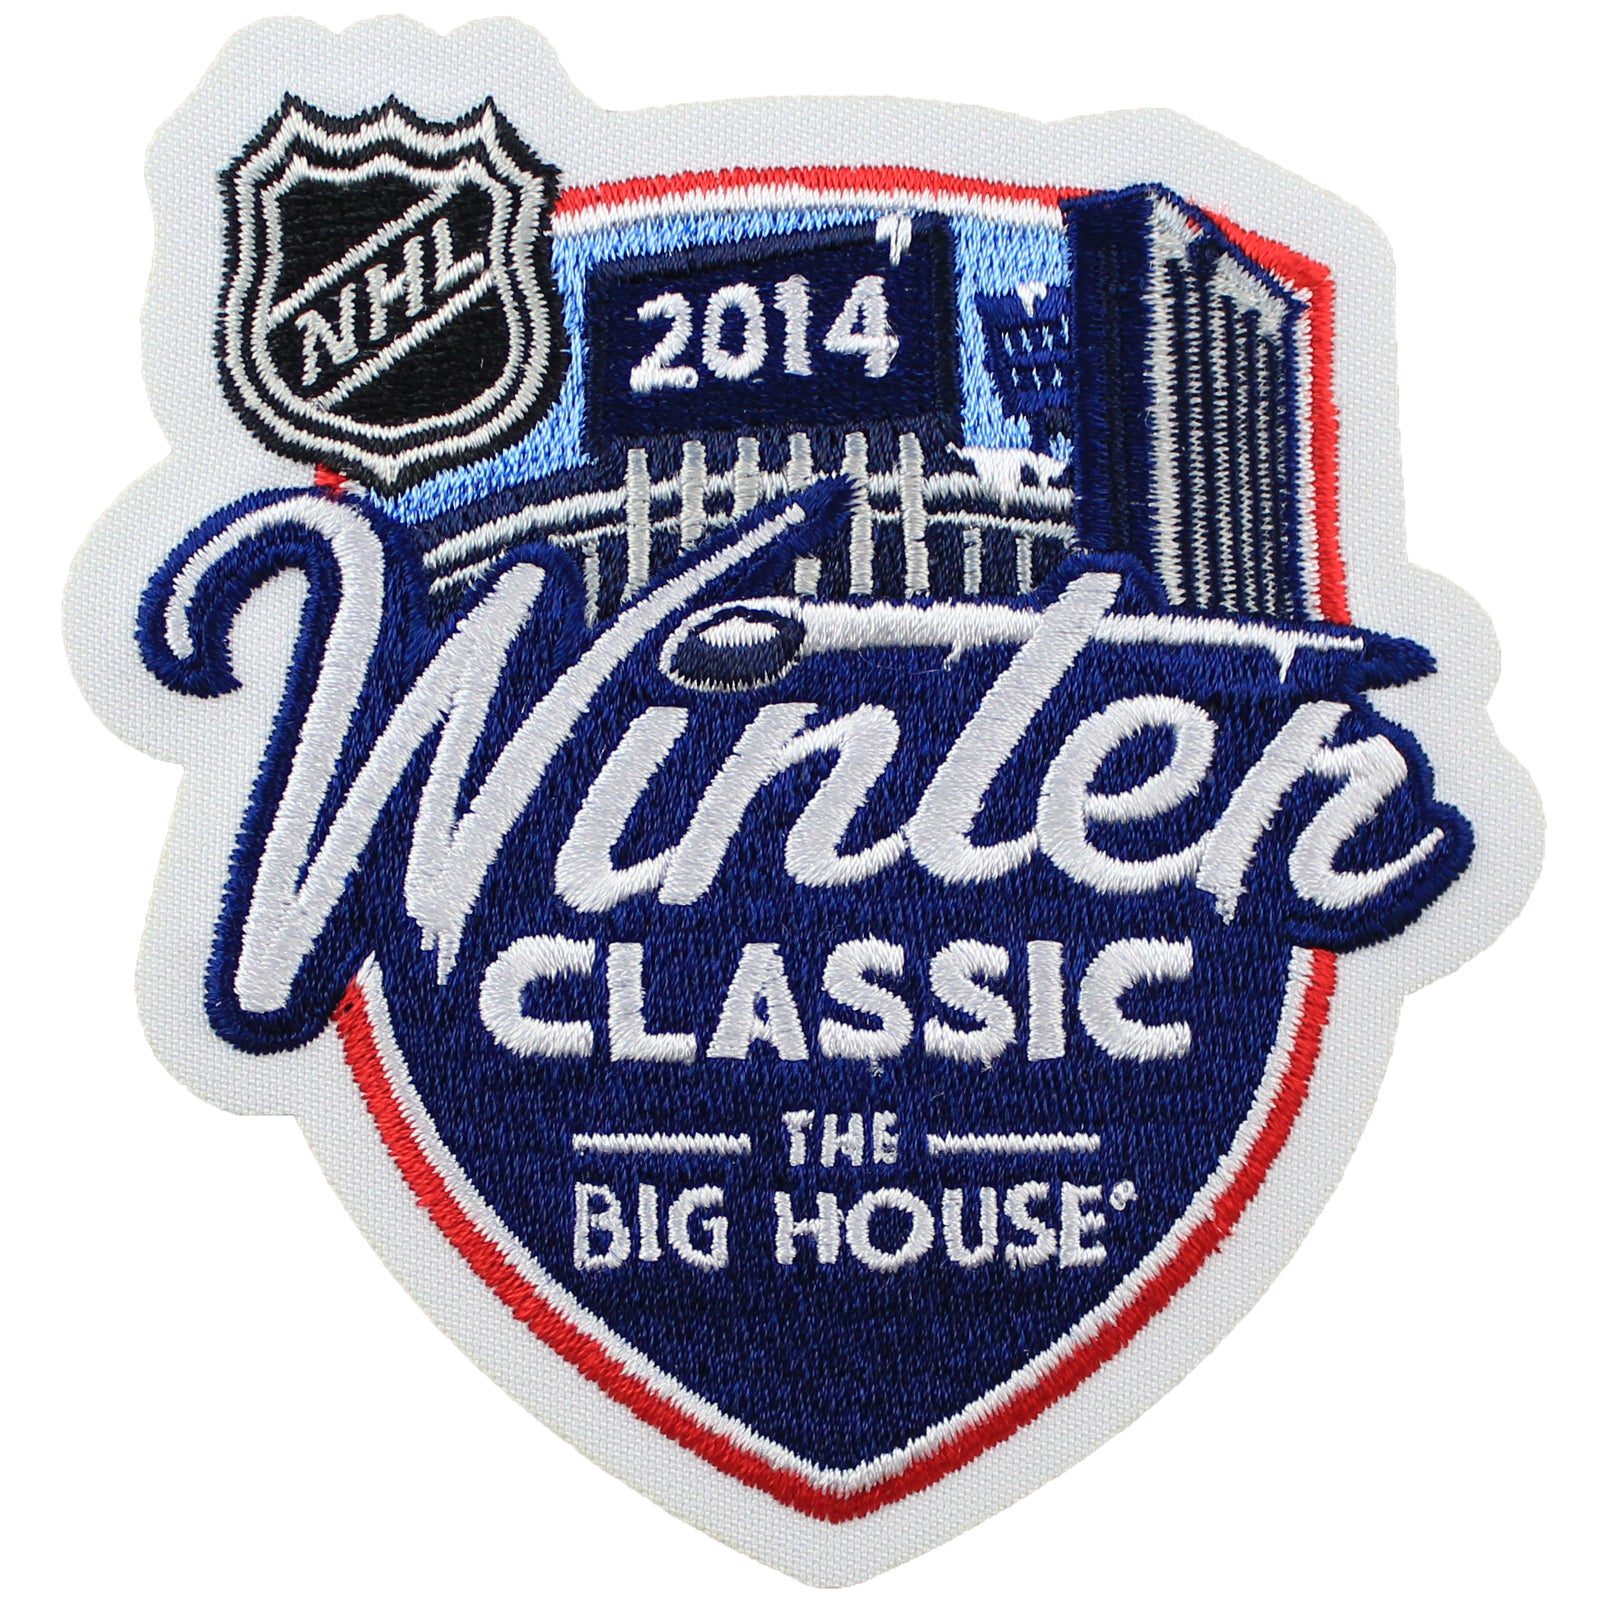  2014 NHL Winter Classic Game Logo Jersey Patch THE BIG HOUSE  Detroit Red Wings Vs Toronto Maple Leafs